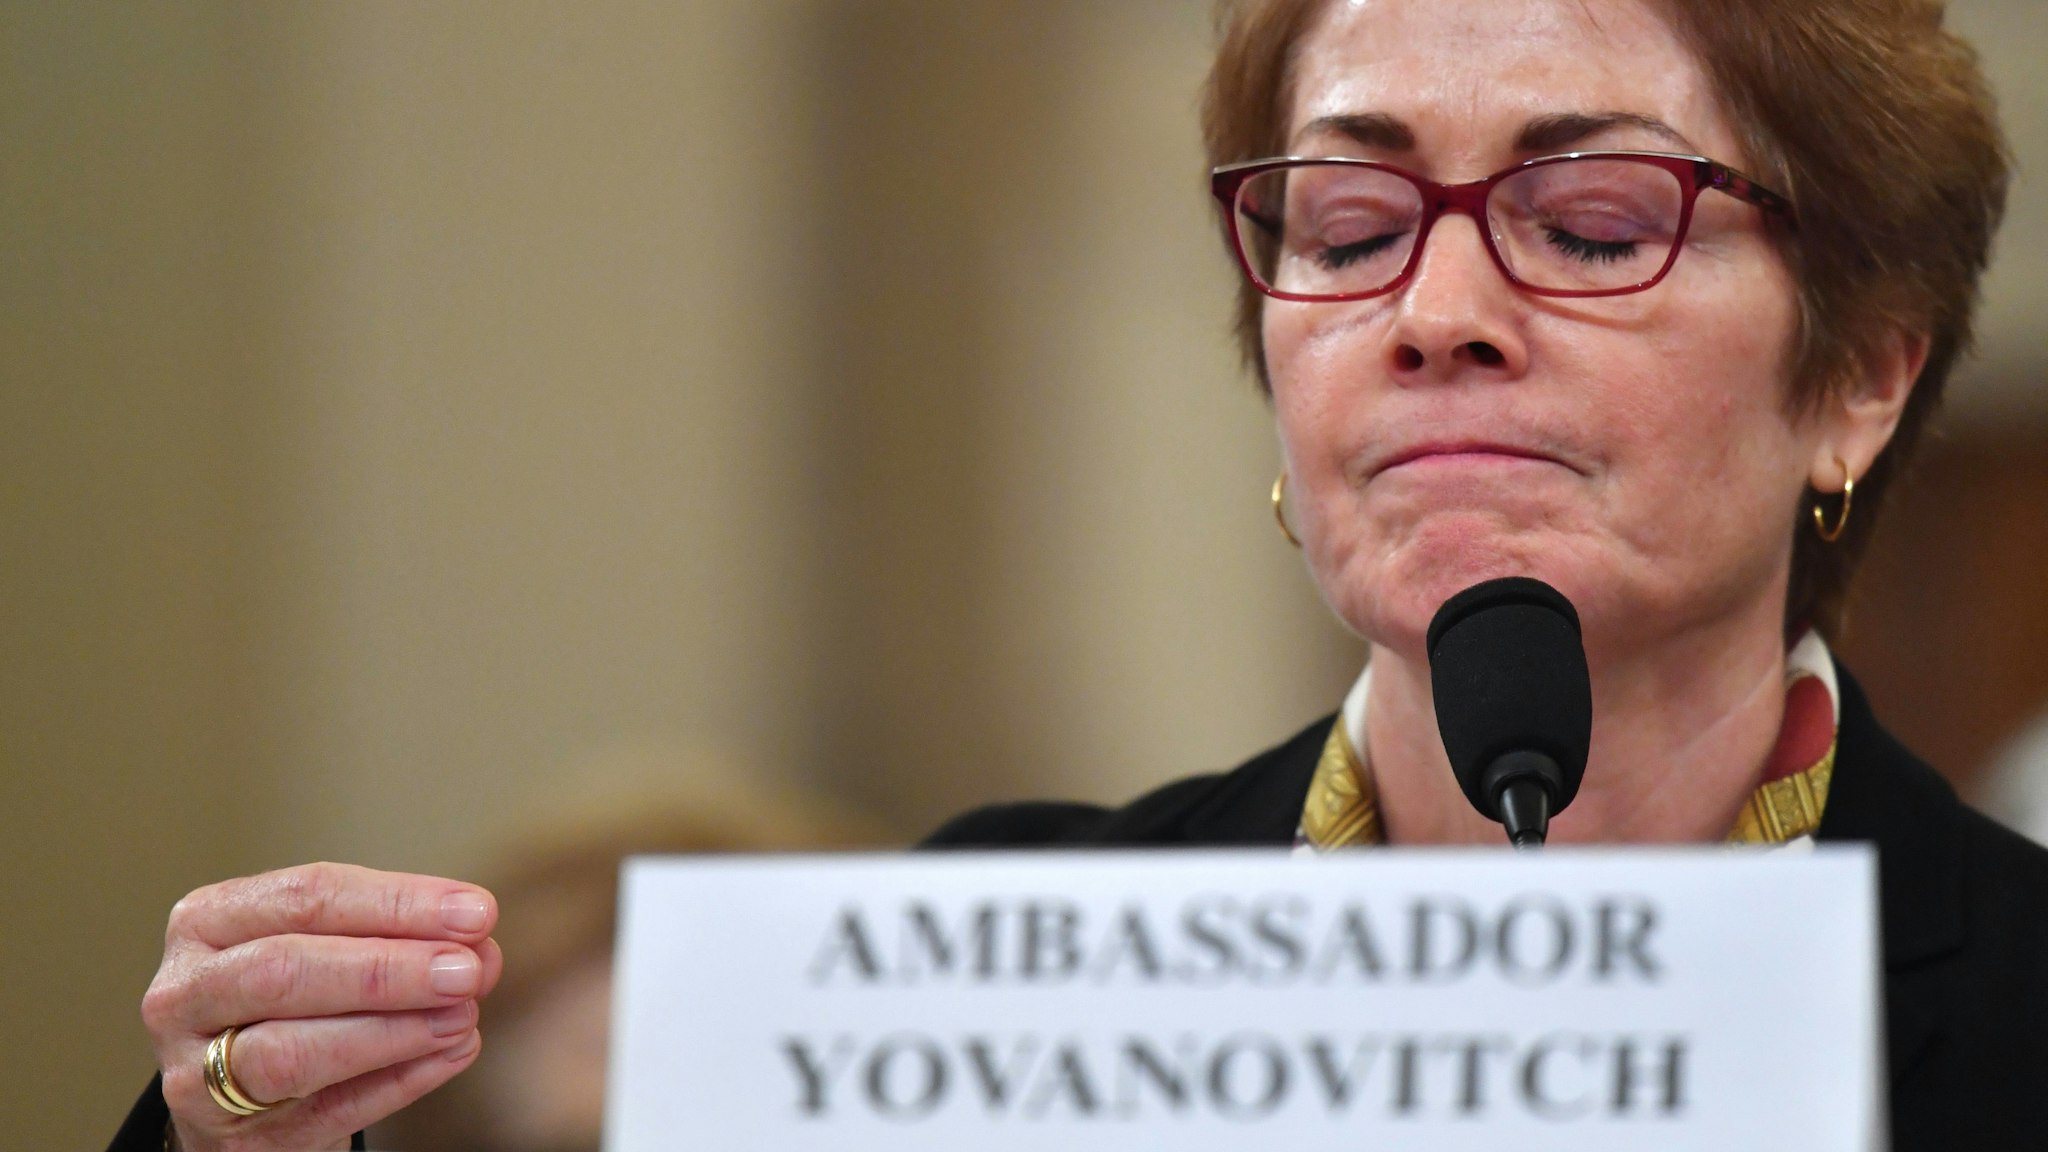 Former US Ambassador to the Ukraine Marie Yovanovitch testifies before the House Permanent Select Committee on Intelligence as part of the impeachment inquiry into US President Donald Trump, on Capitol Hill on November 15, 2019 in Washington DC. - Public impeachment hearings resume Friday with the testimony of former ambassador to Ukraine Marie Yovanovitch, who says she was ousted because the Trump administration believed she would not go along with plans to pressure Ukraine to investigate Democrat Joe Biden, a potential Trump White House rival in 2020.